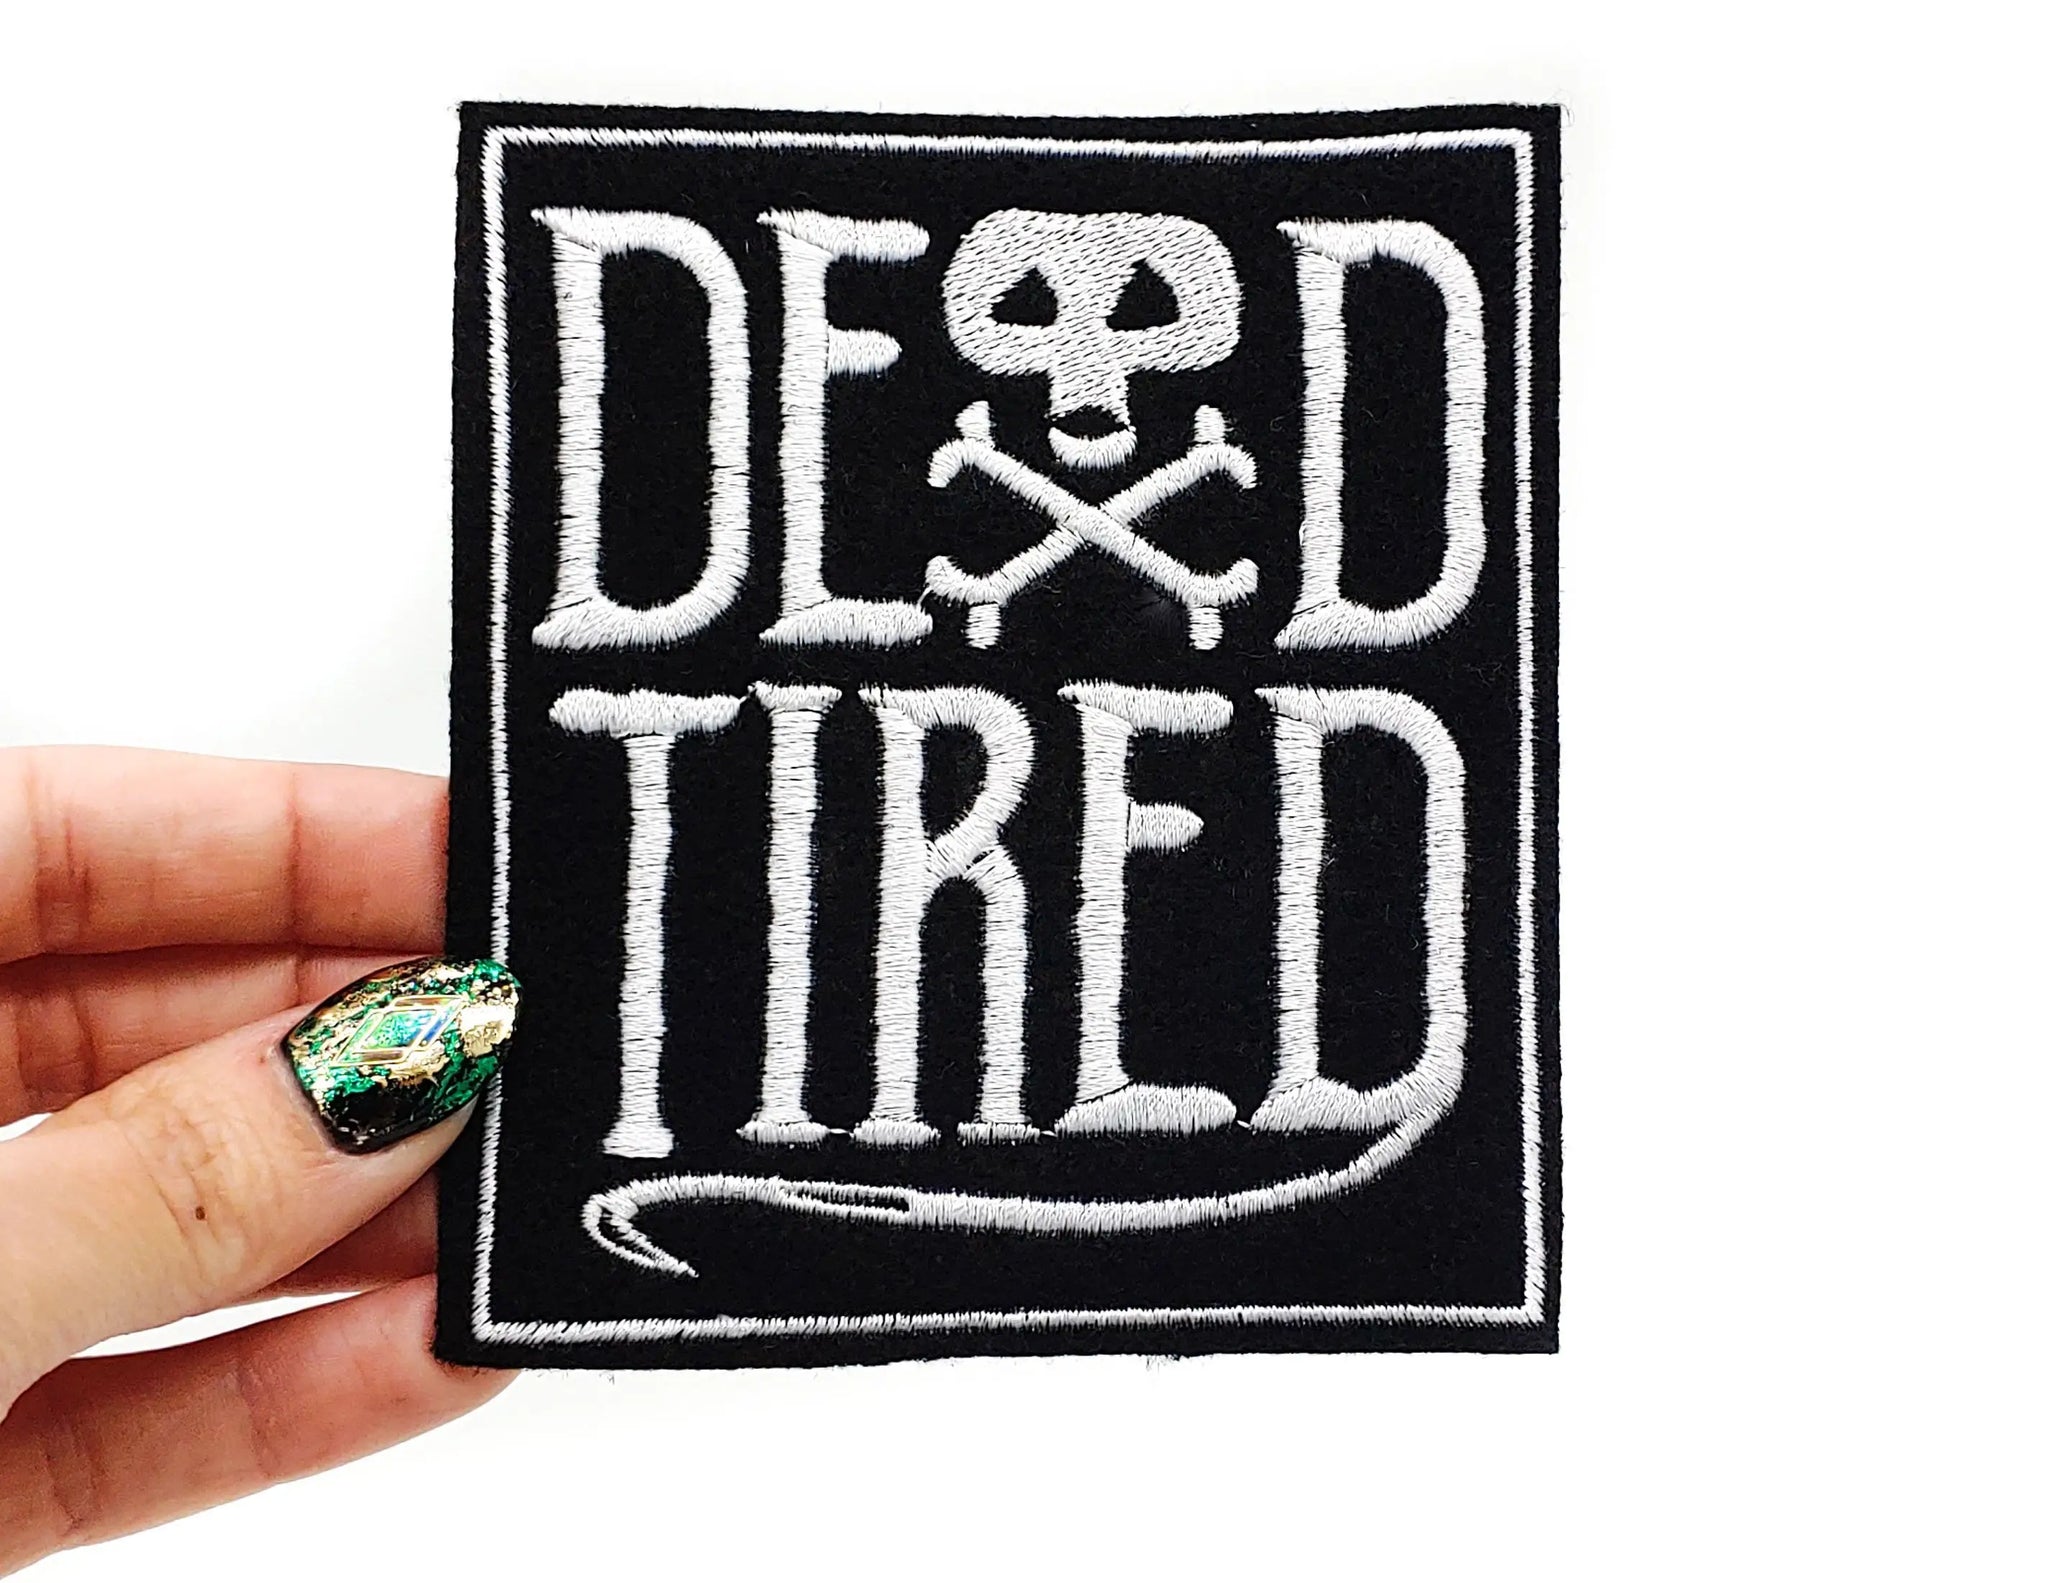 A rectangular embroidered patch with the words “DEAD TIRED” written in white stitching. The A in the word “dead” is a skull and crossbones 